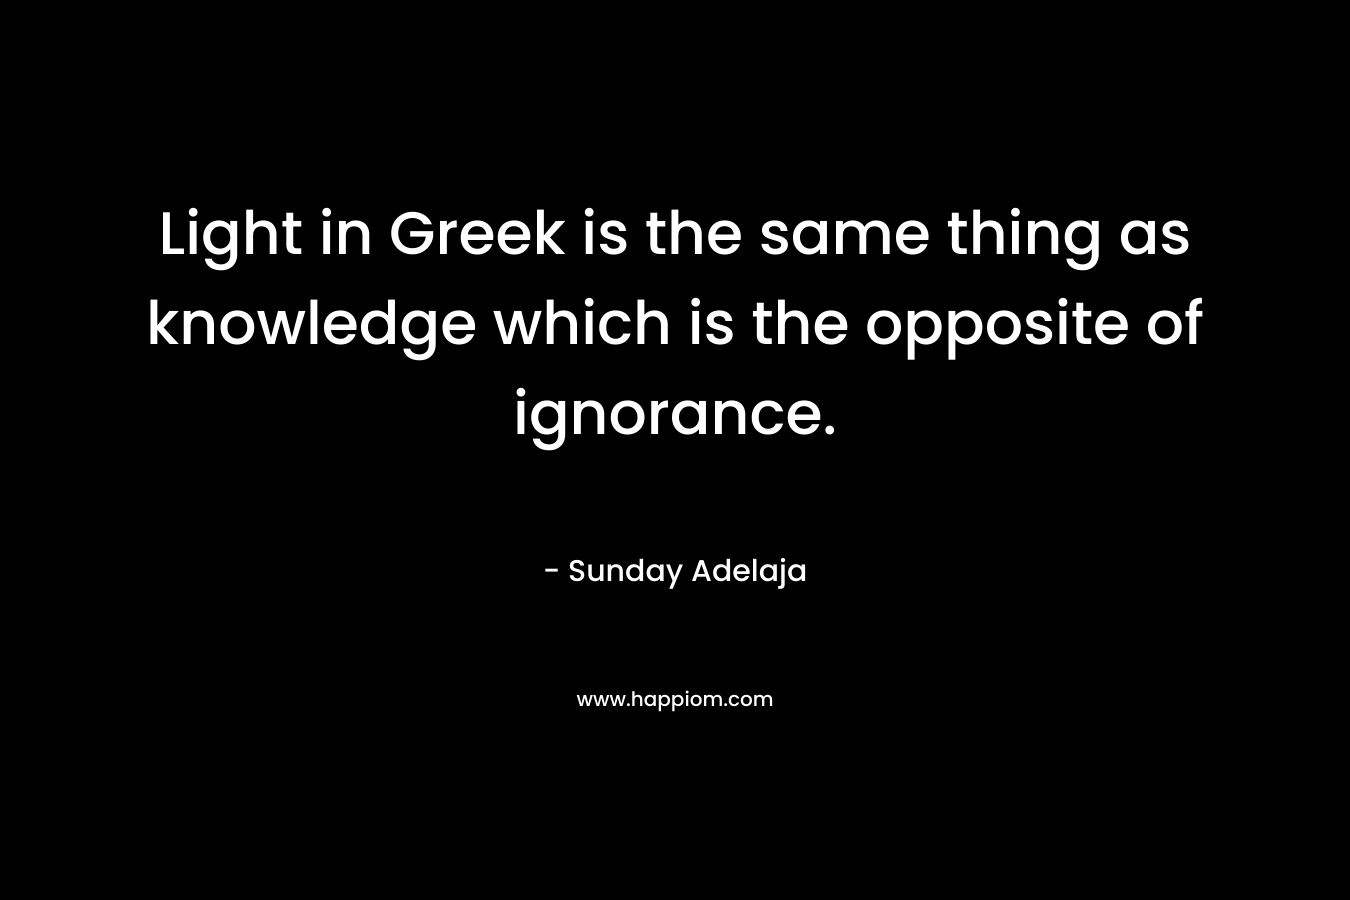 Light in Greek is the same thing as knowledge which is the opposite of ignorance. – Sunday Adelaja